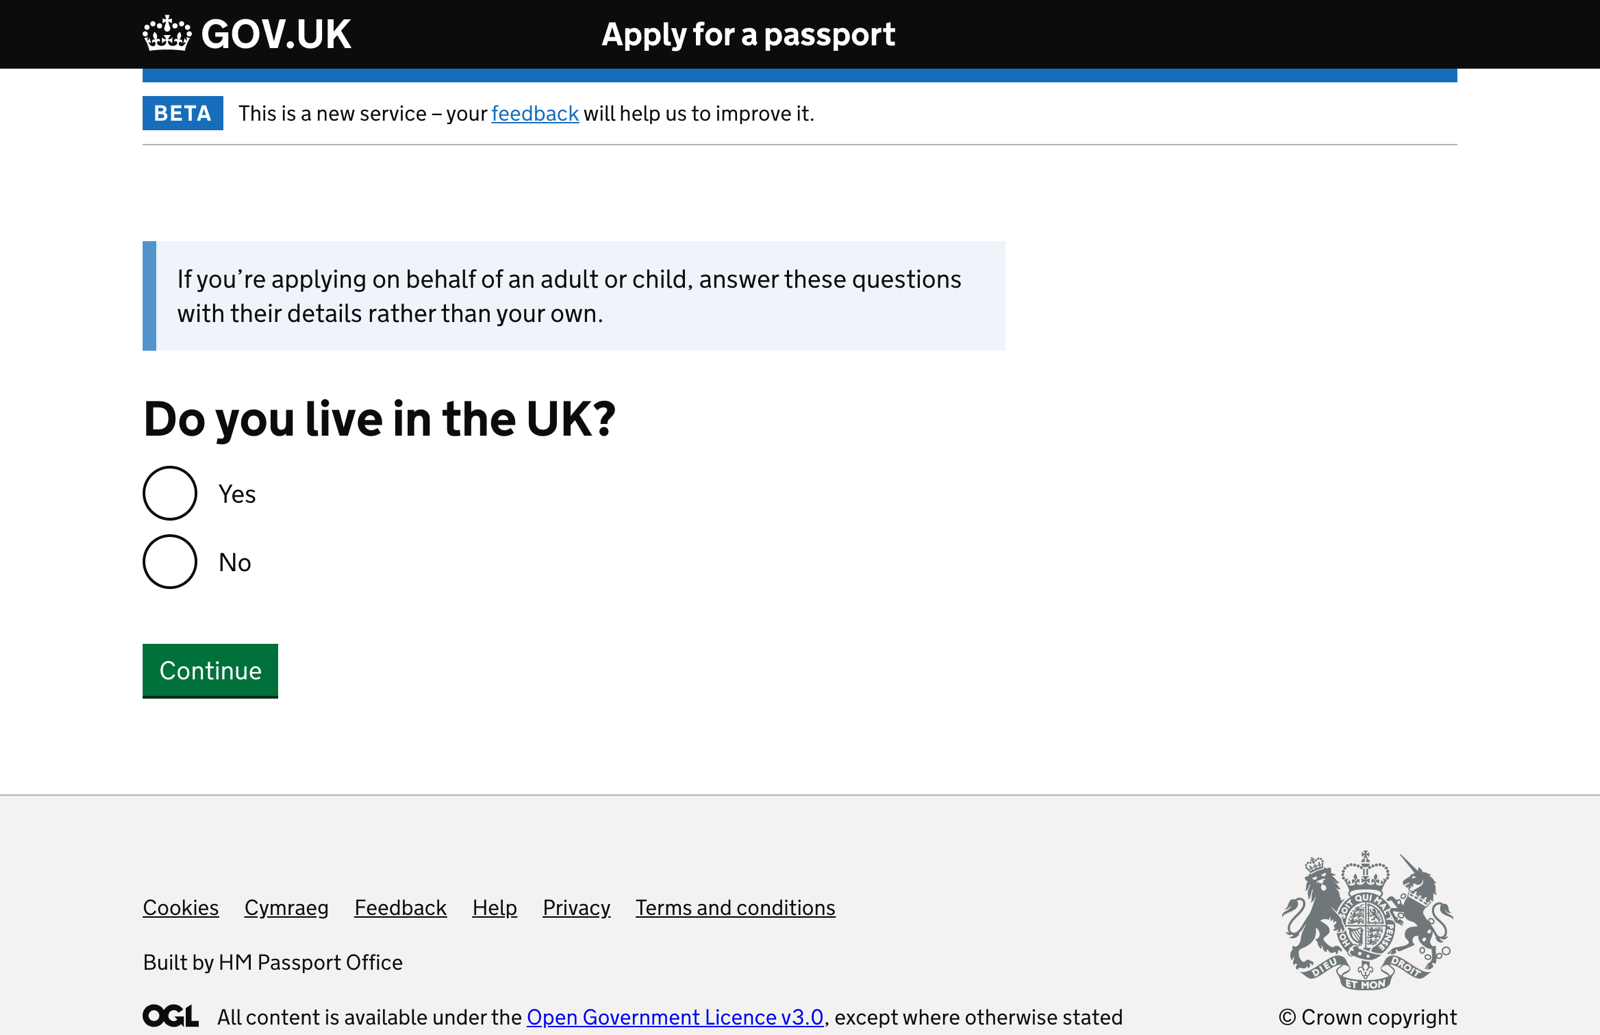 Screenshot of a gov.uk 'Apply for a passport' page